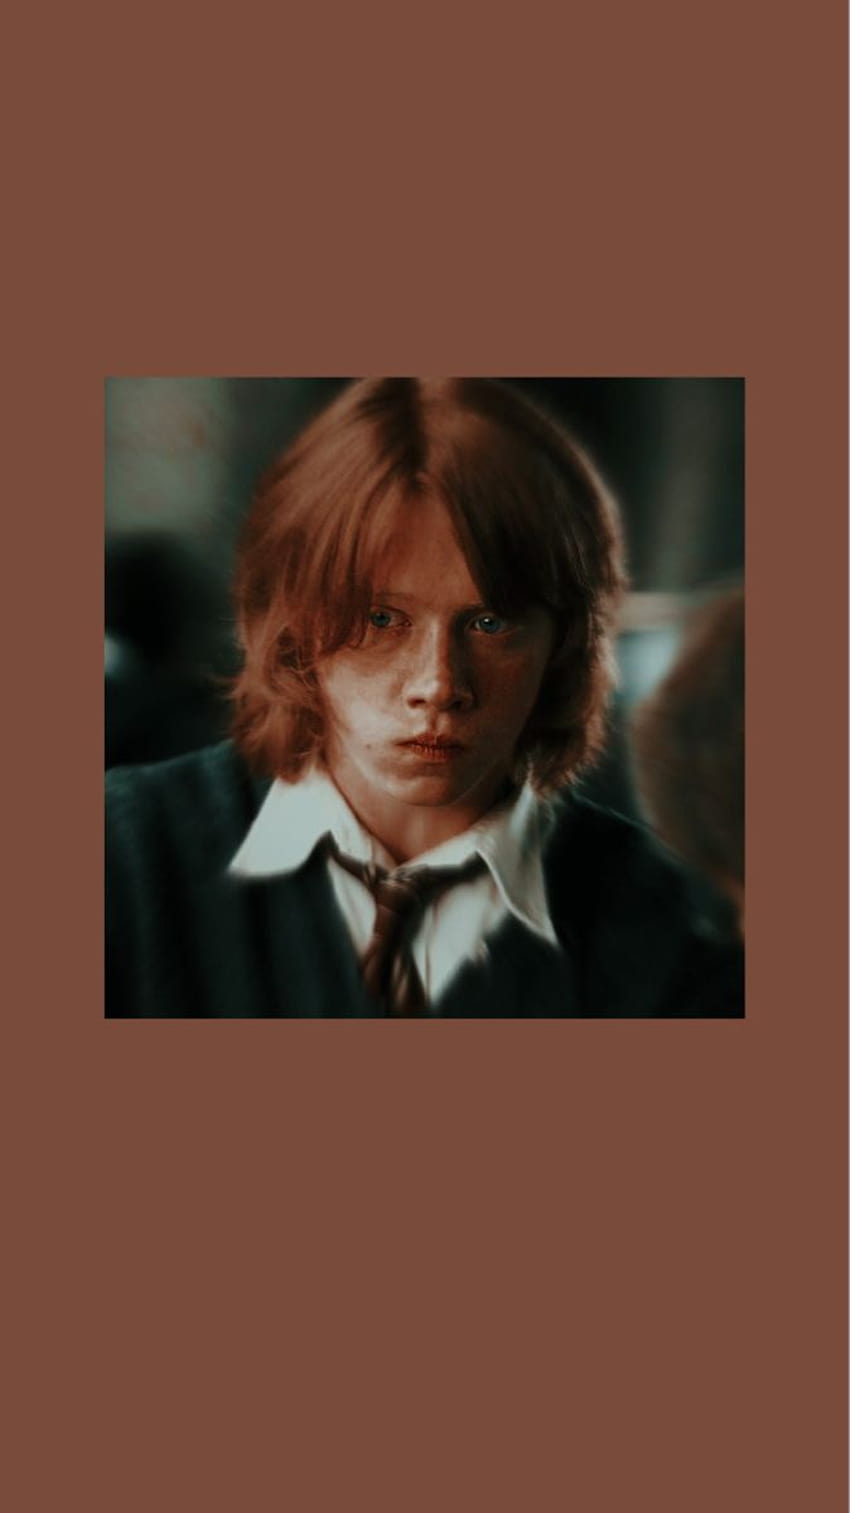 Wallpaper ID: 647917 / Ron Weasley, 1080P, clothing, child, night, Trinity,  surprise, young adult, hairstyle, teenage boys, harry, potter, standing,  adolescence, girls, in the woods free download